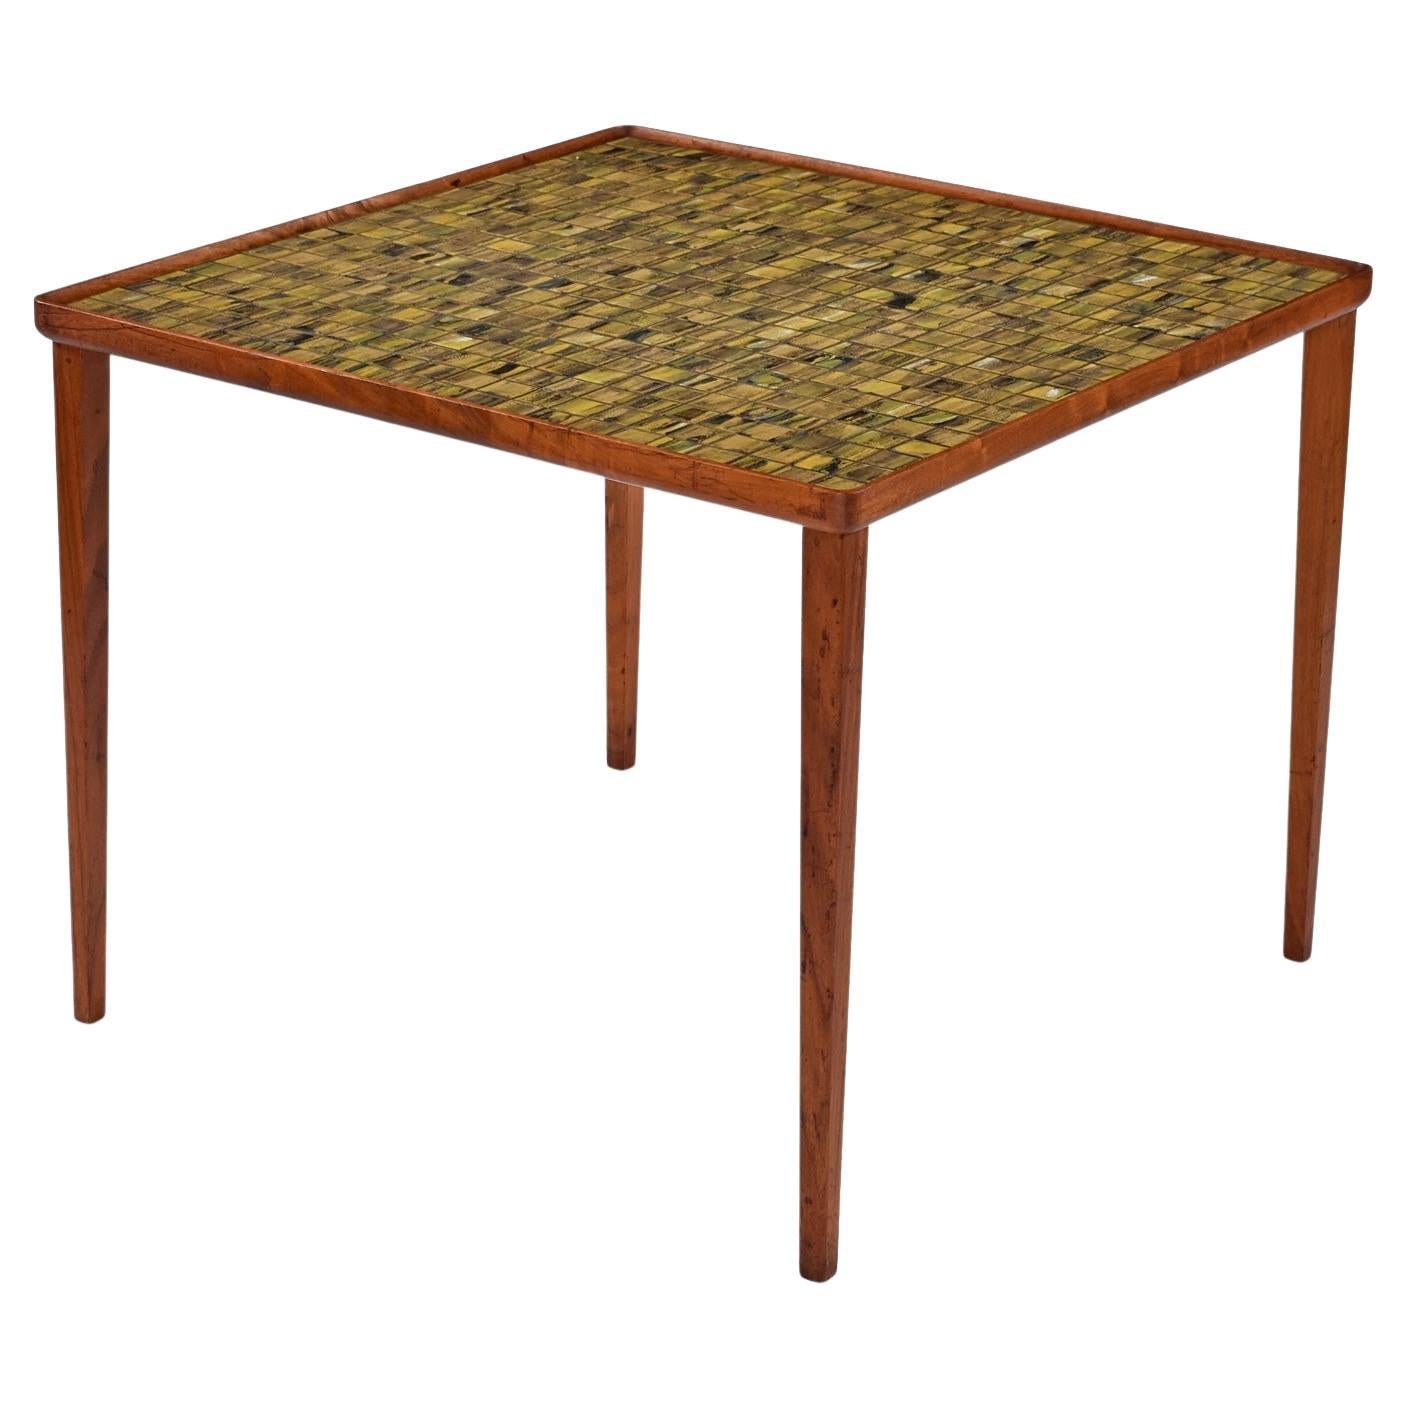 We’ve never seen a tile top Danish teak cocktail table with this captivating tile design.  Each tile is a completely unique, individual work of art.  The tile colors are an ebb and flow of yellows, greens and blacks.  The rich earth tones of the